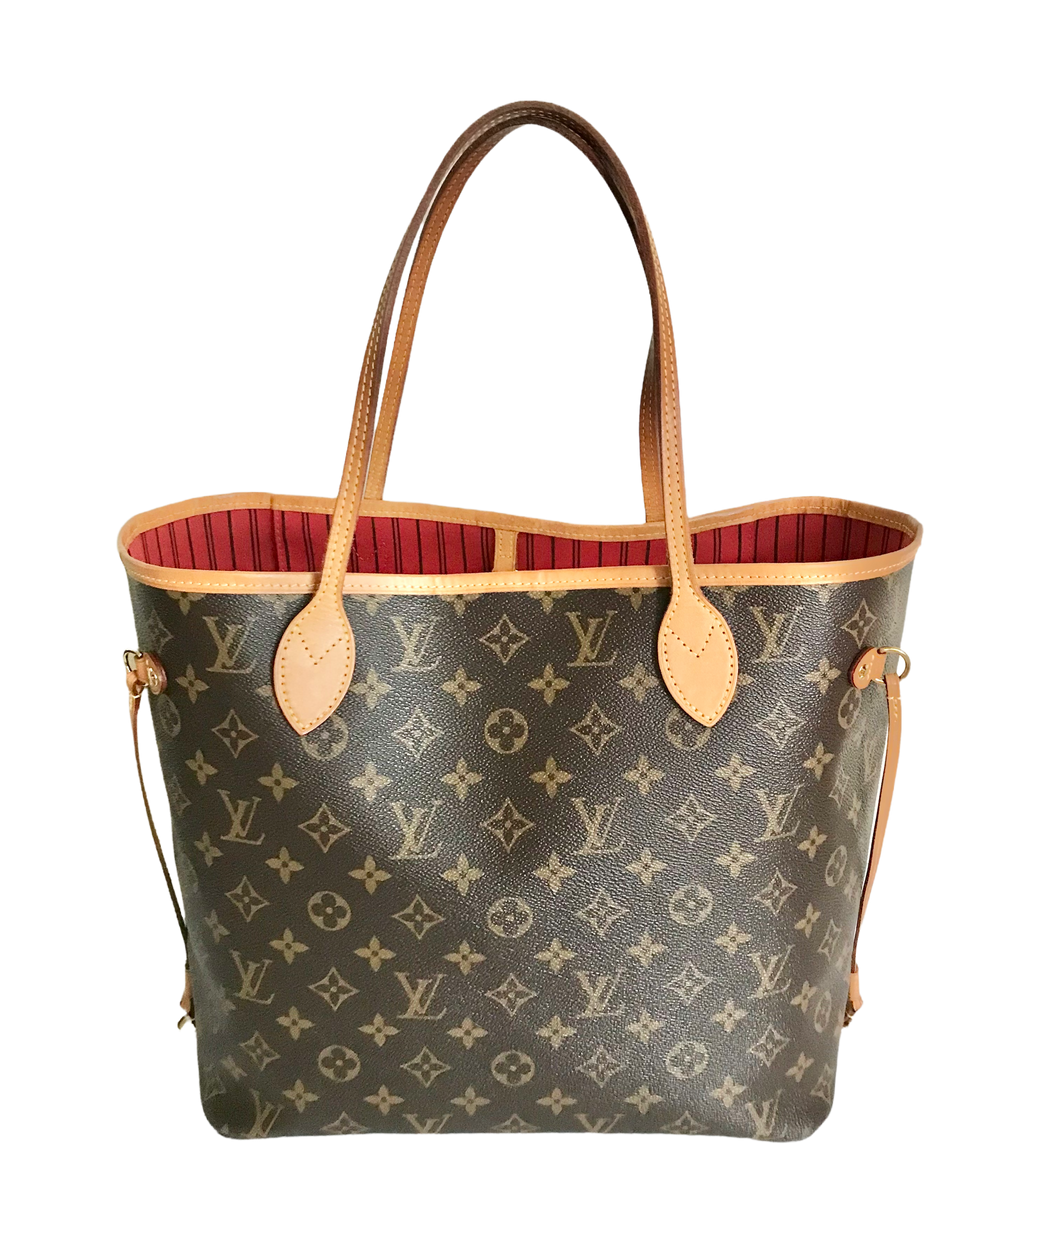 Ramages Neverfull MM (Authentic Pre-Owned) – The Lady Bag